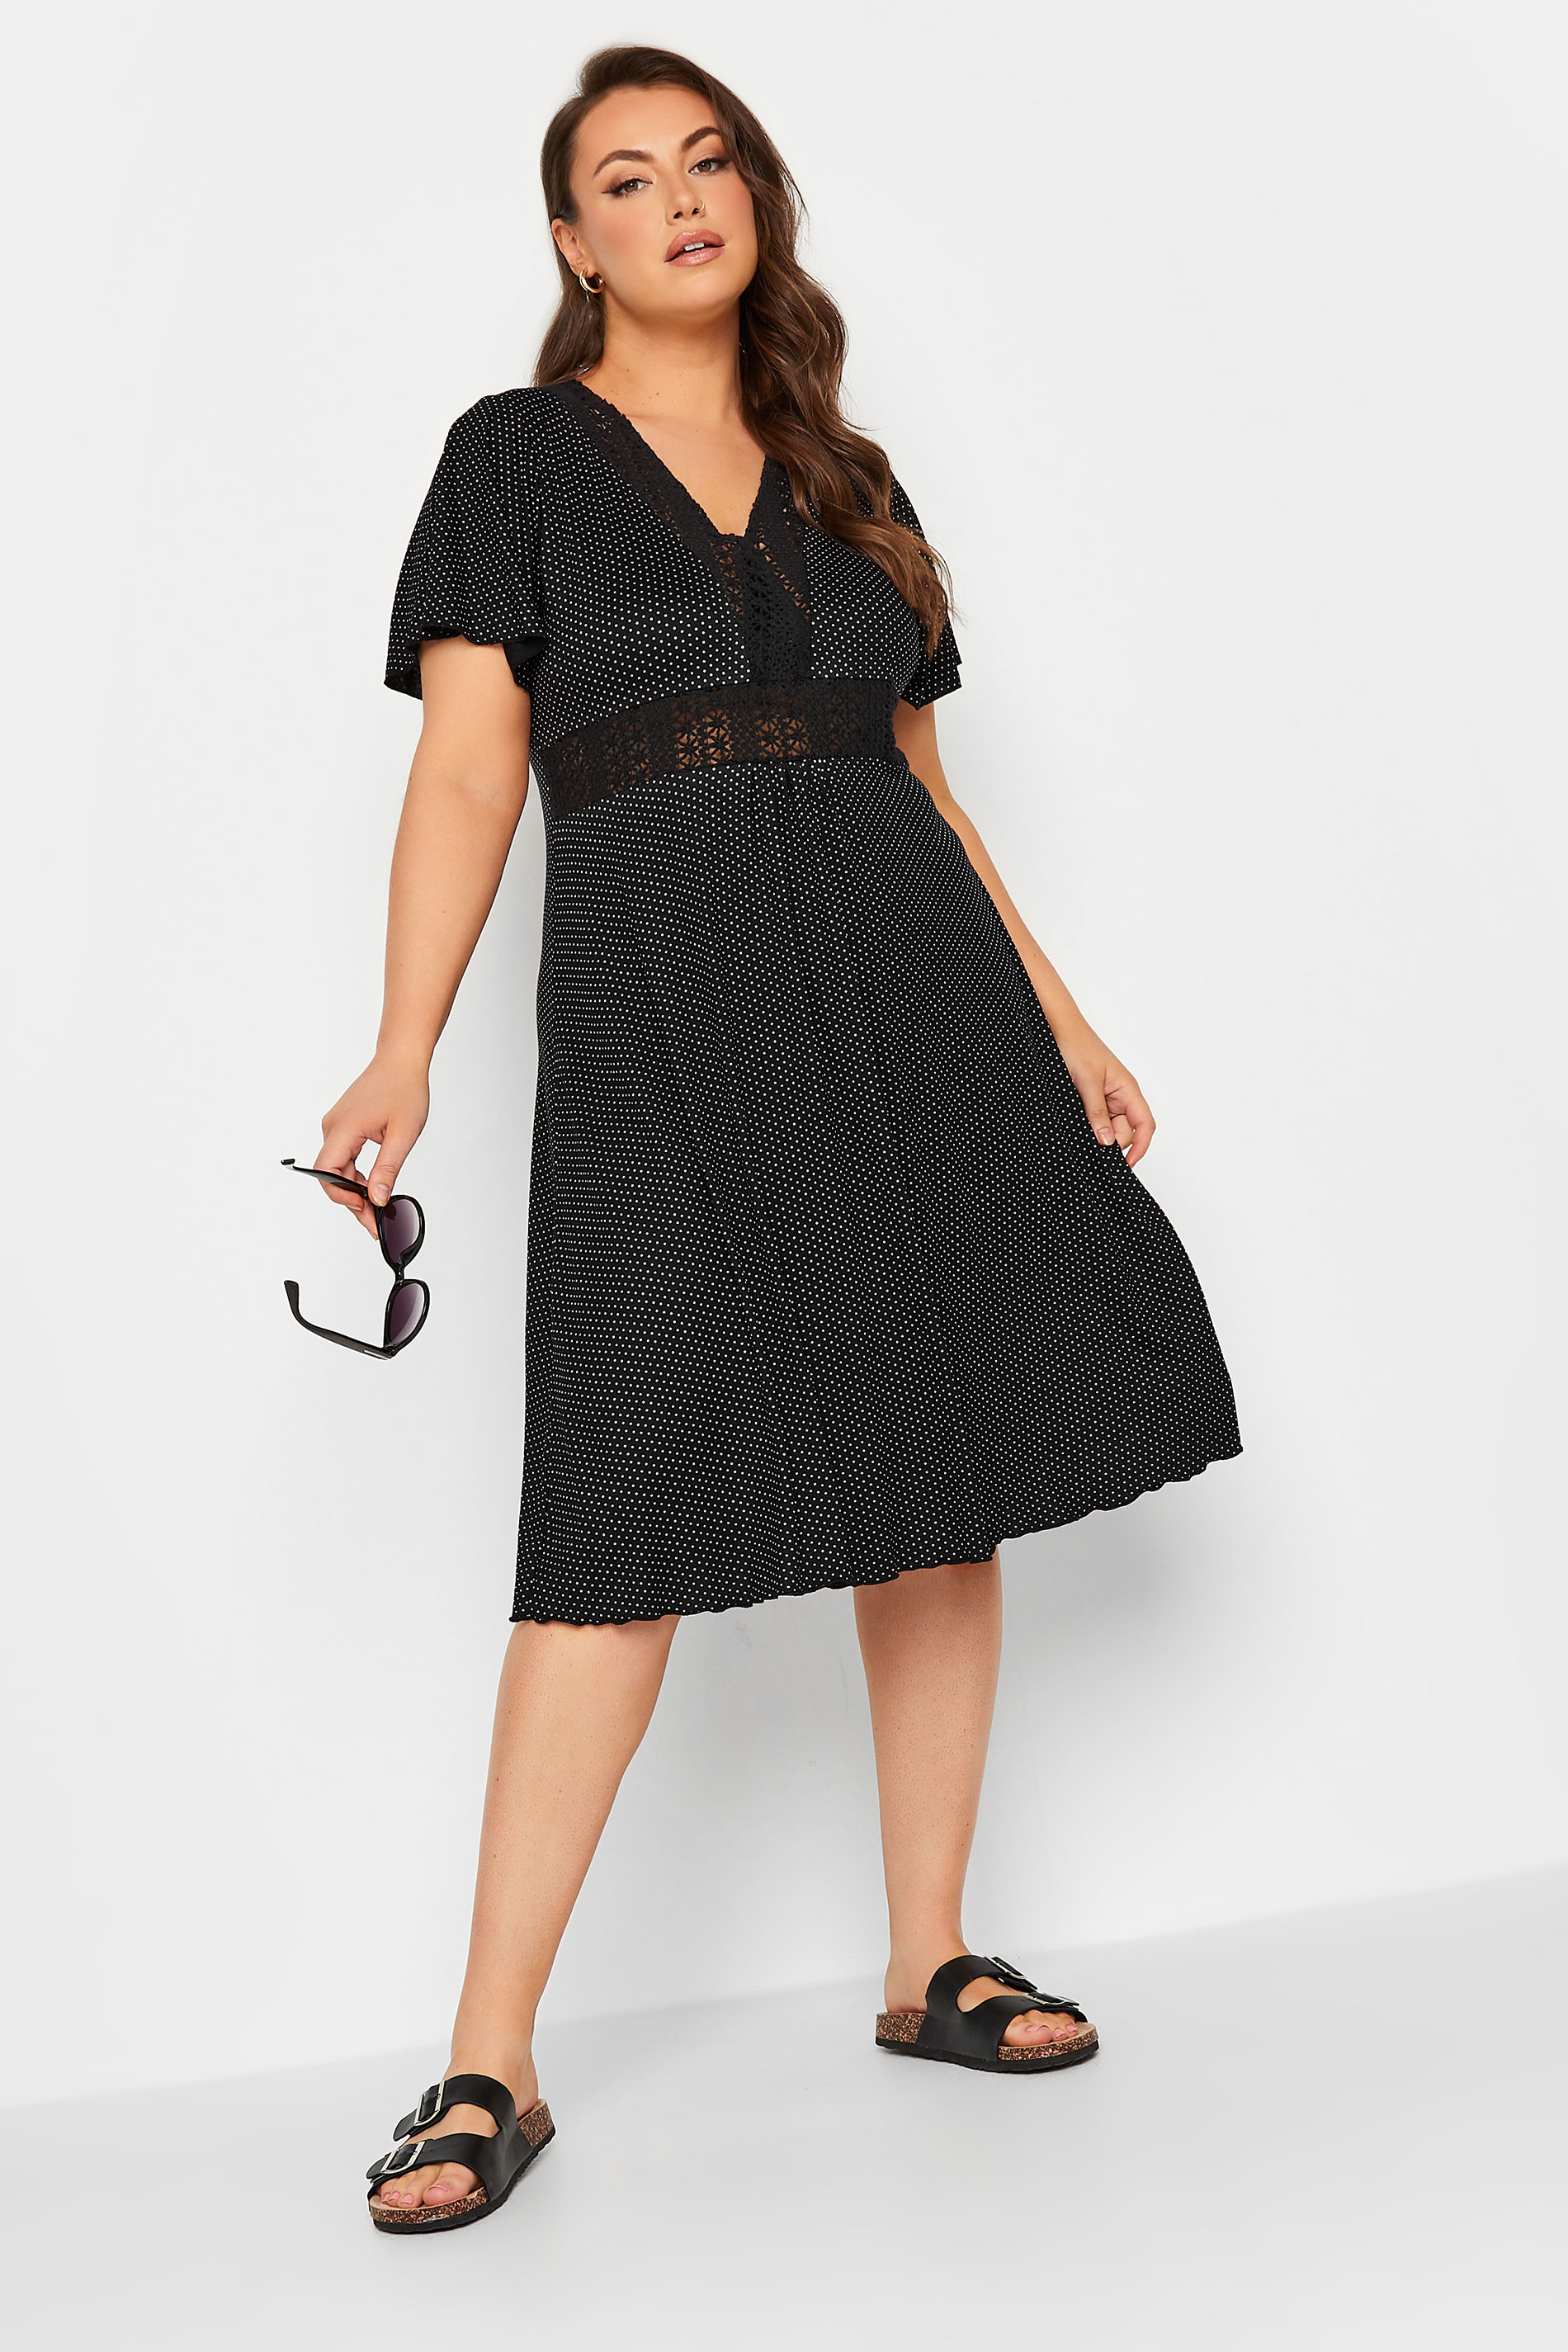 YOURS Plus Size Black Polka Dot Print Lace Detail Dress | Yours Clothing 1